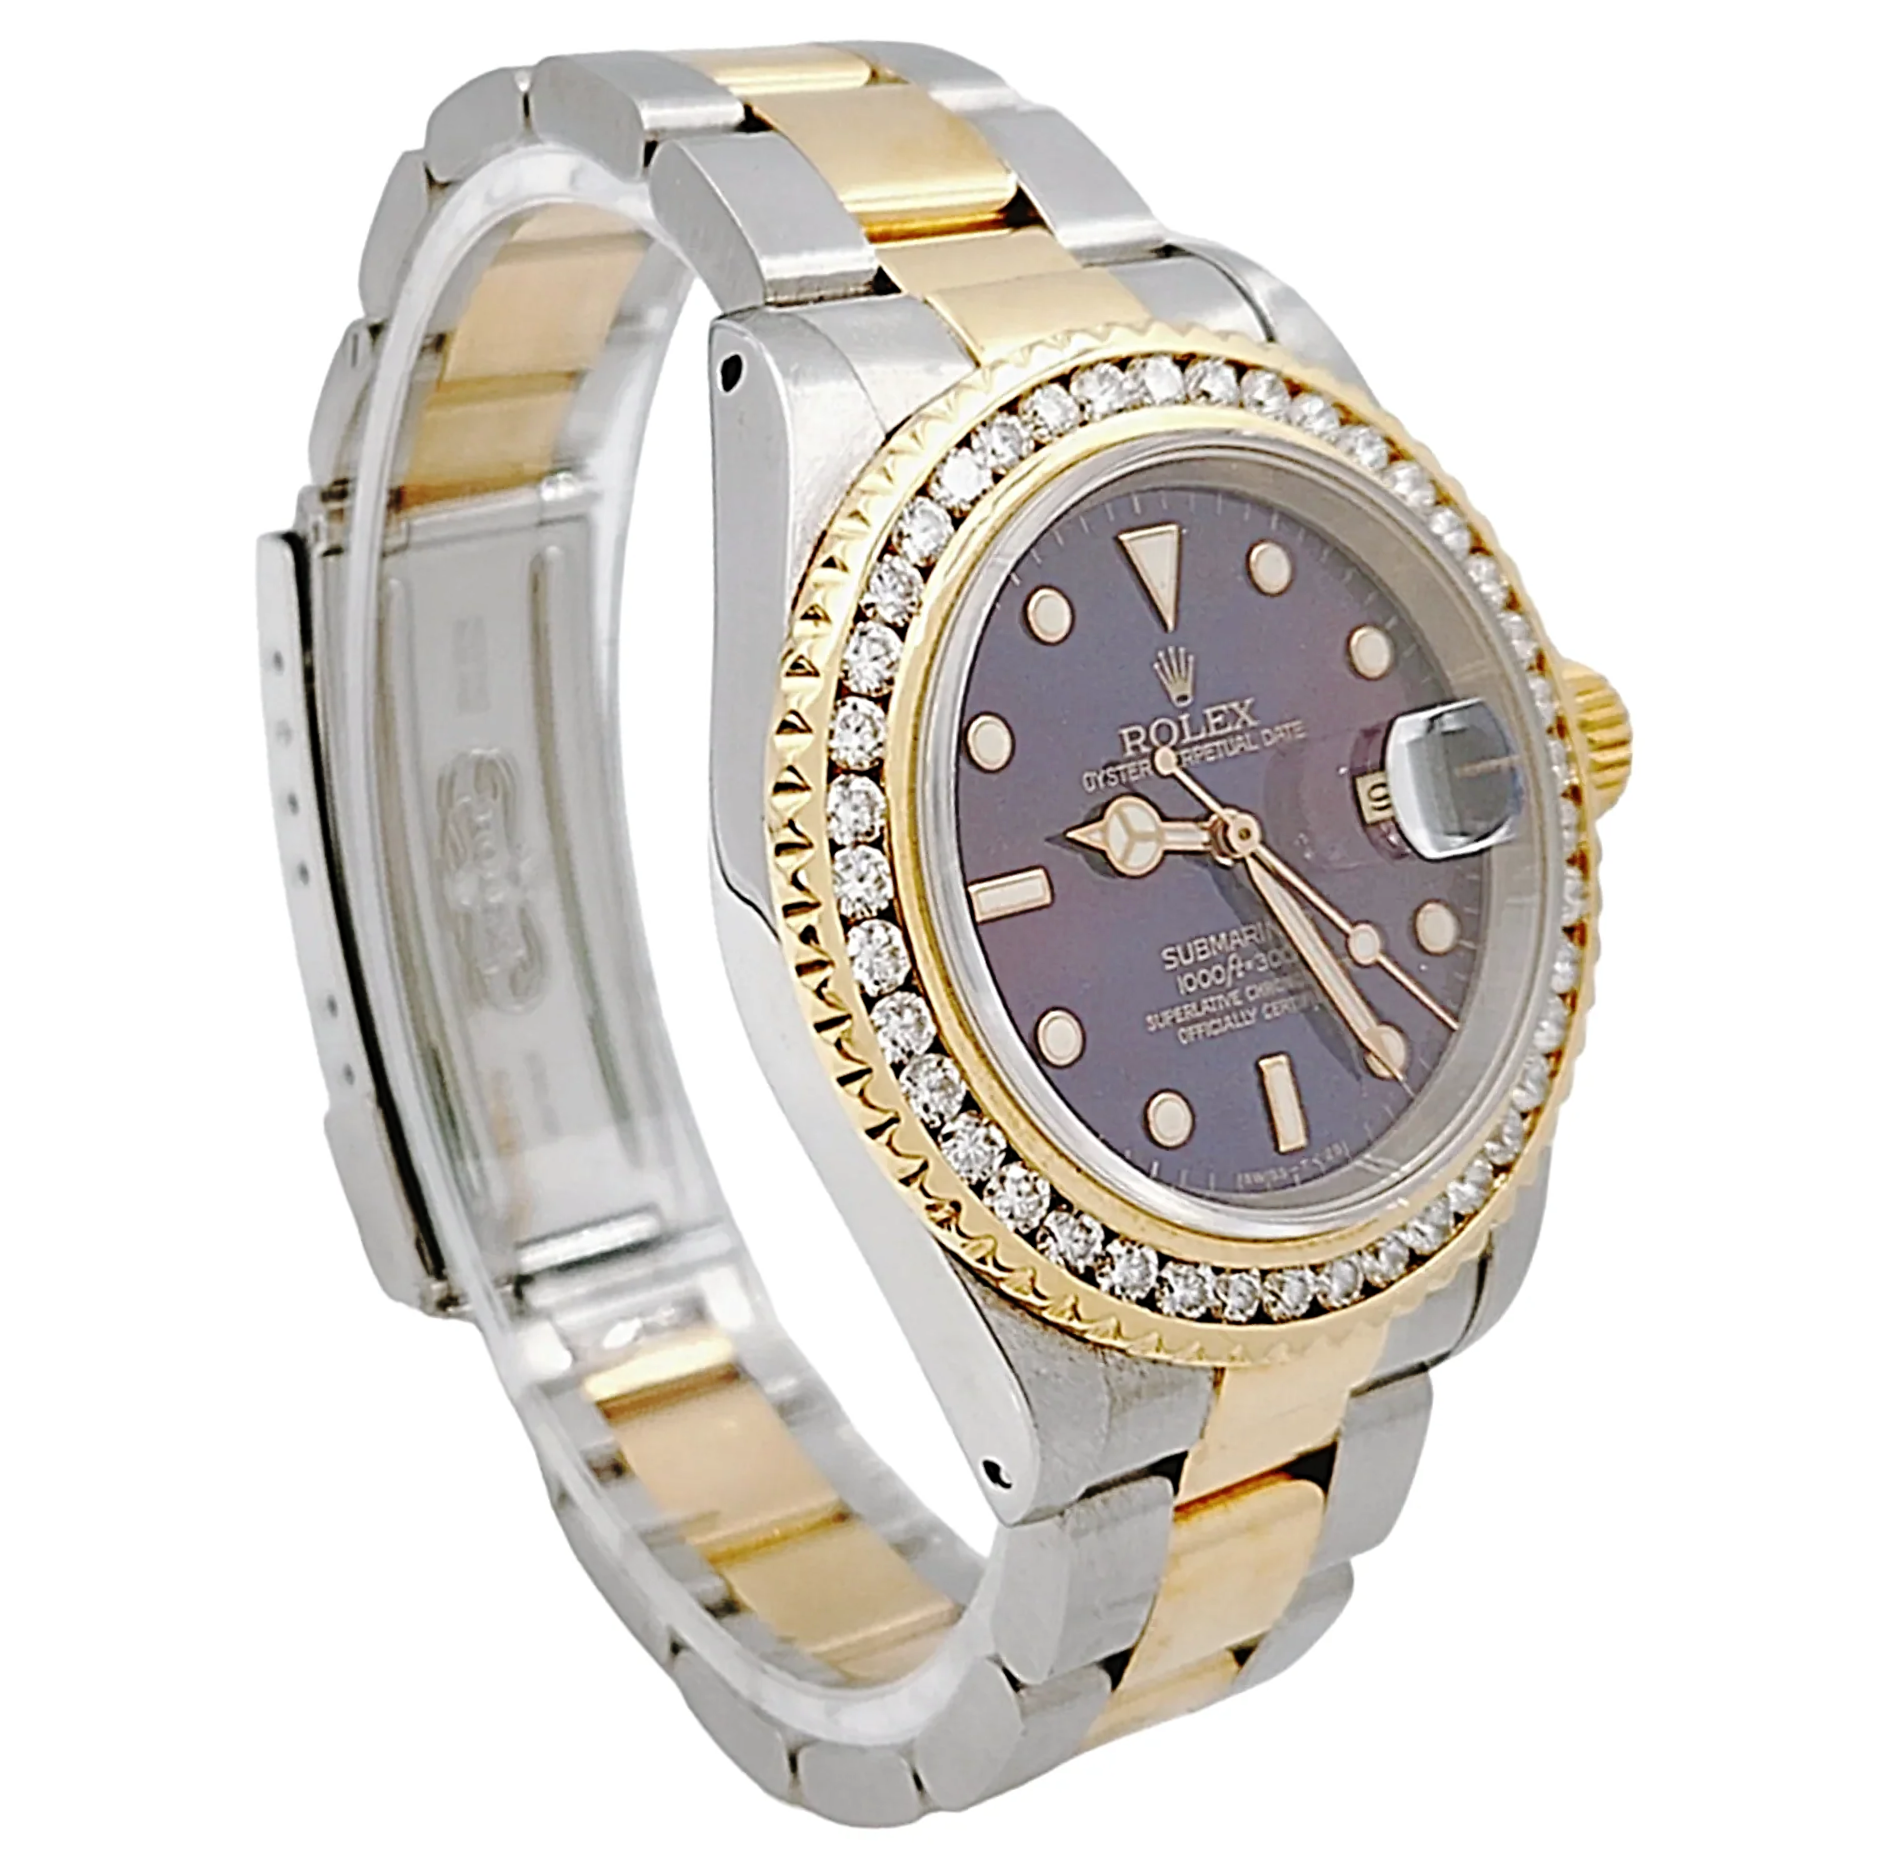 Men's Rolex 40mm Submariner 18K Yellow Gold / Stainless Steel Wristwatch w/ Blue Dial & 3CT. Diamond Bezel. (Pre-Owned)